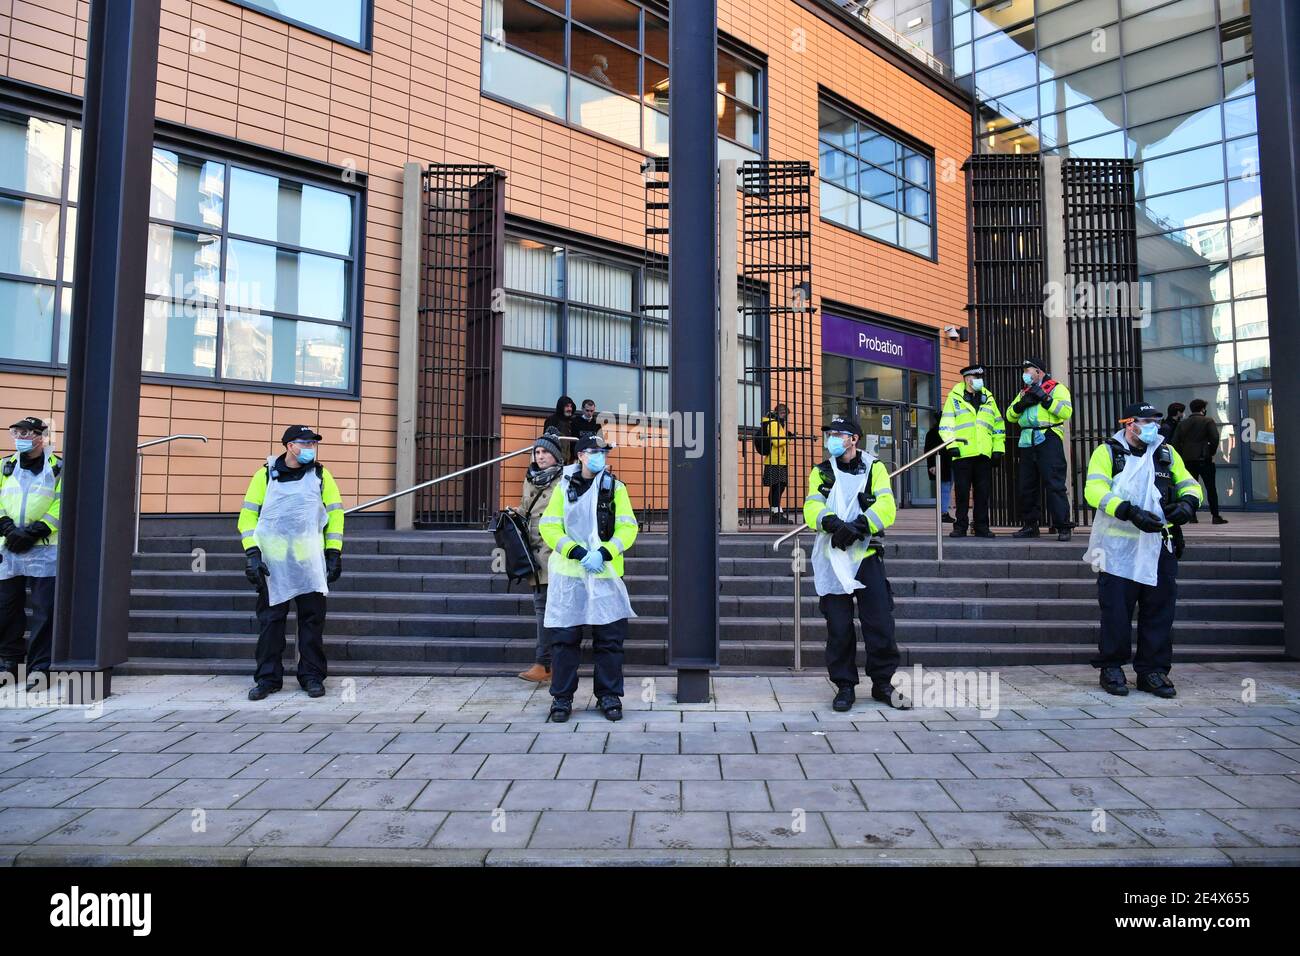 Police outside Bristol Magistrates' Court, where Rhian Graham, Milo Ponsford, Jake Skuse and Sage Willoughby are due to appear charged with criminal damage over the toppling of the Edward Colston statue in Bristol during the Black Lives Matter protests in June last year. Picture date: Monday January 25, 2021. Stock Photo